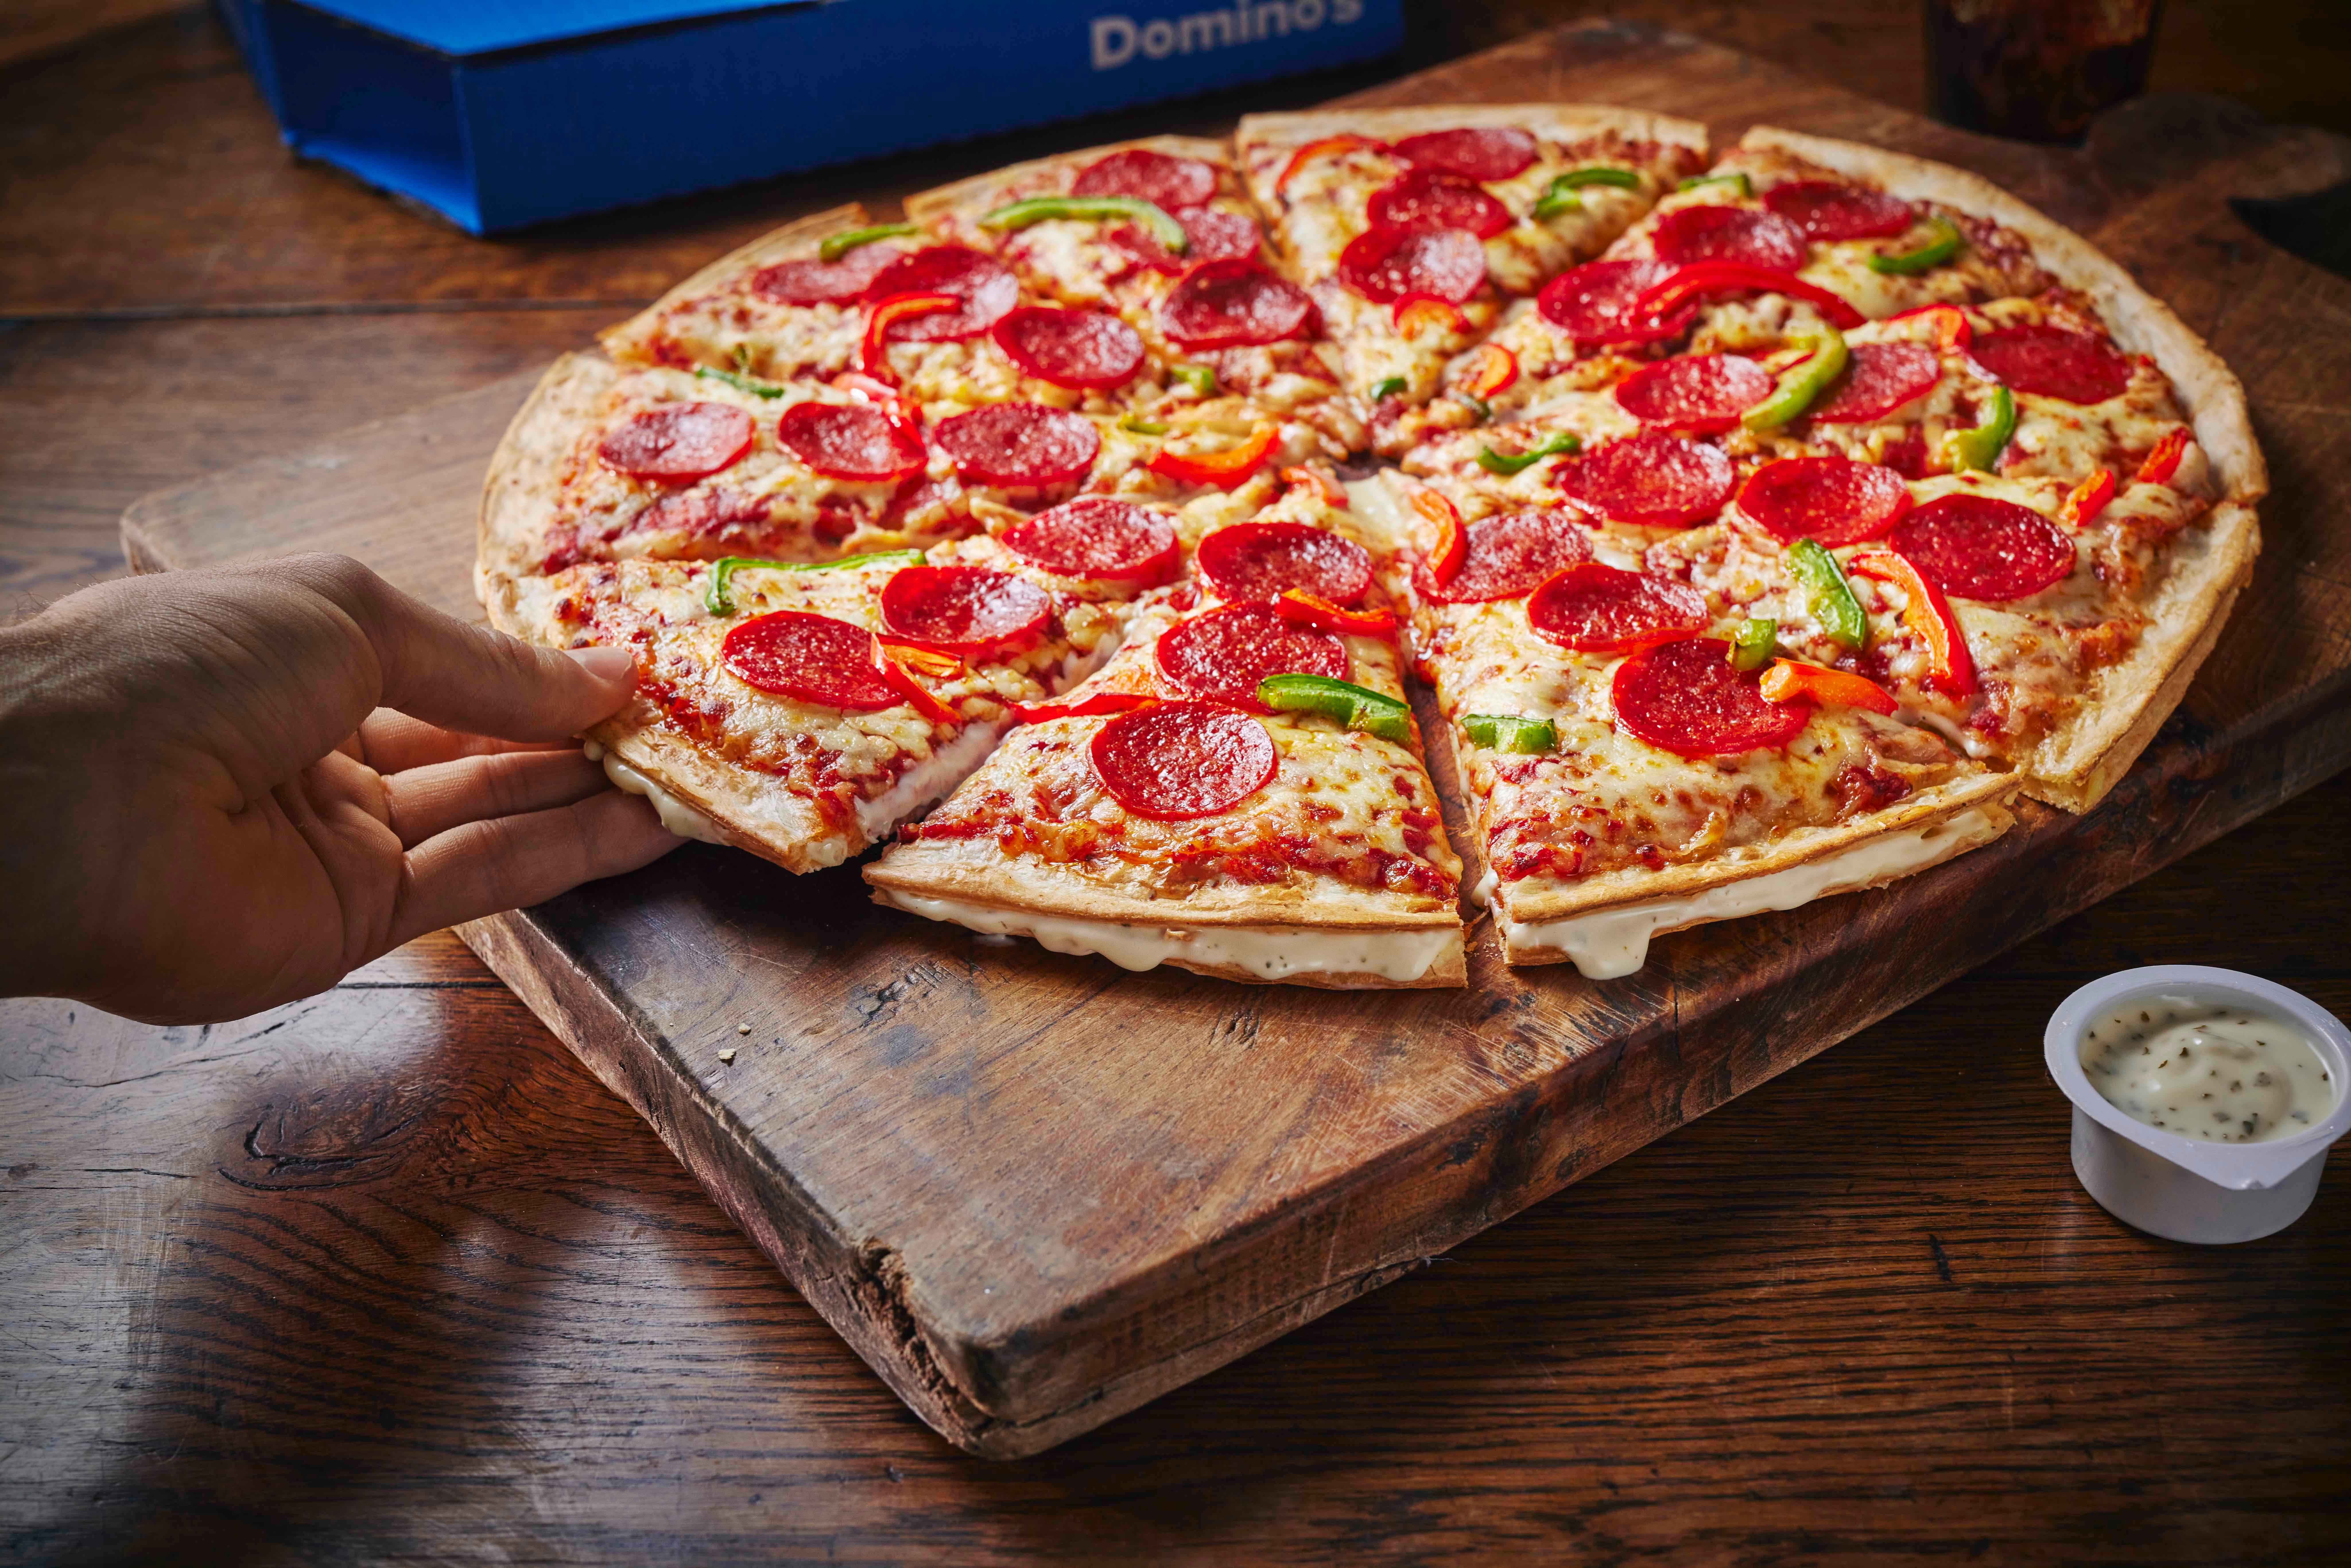 Domino's brings back Double Decadence crust after three year absence